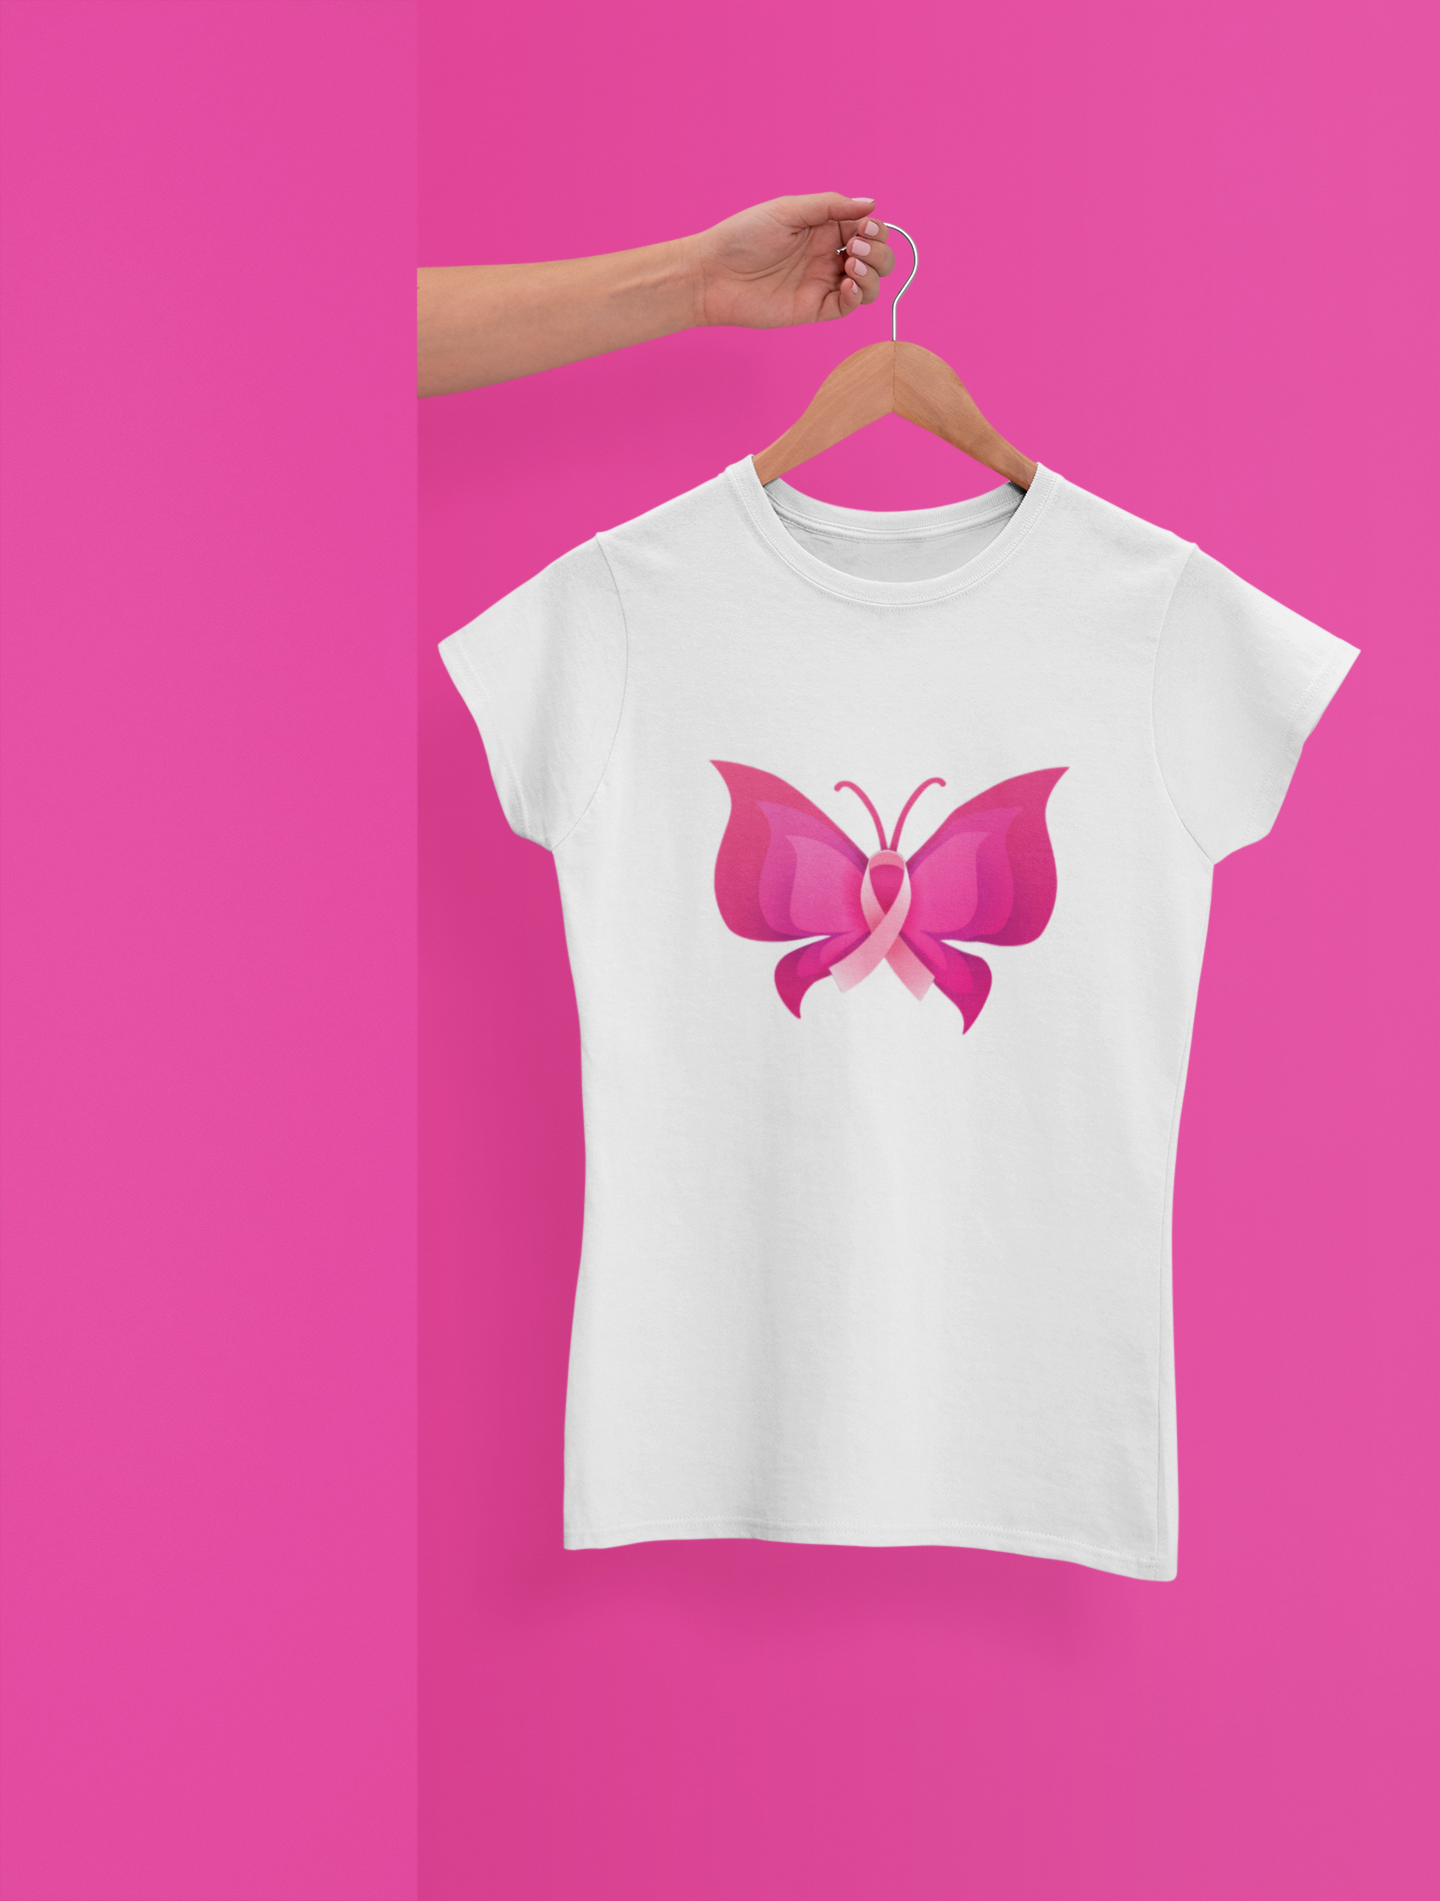 Breast Cancer Awareness - Fly The Butterfly Ribbon